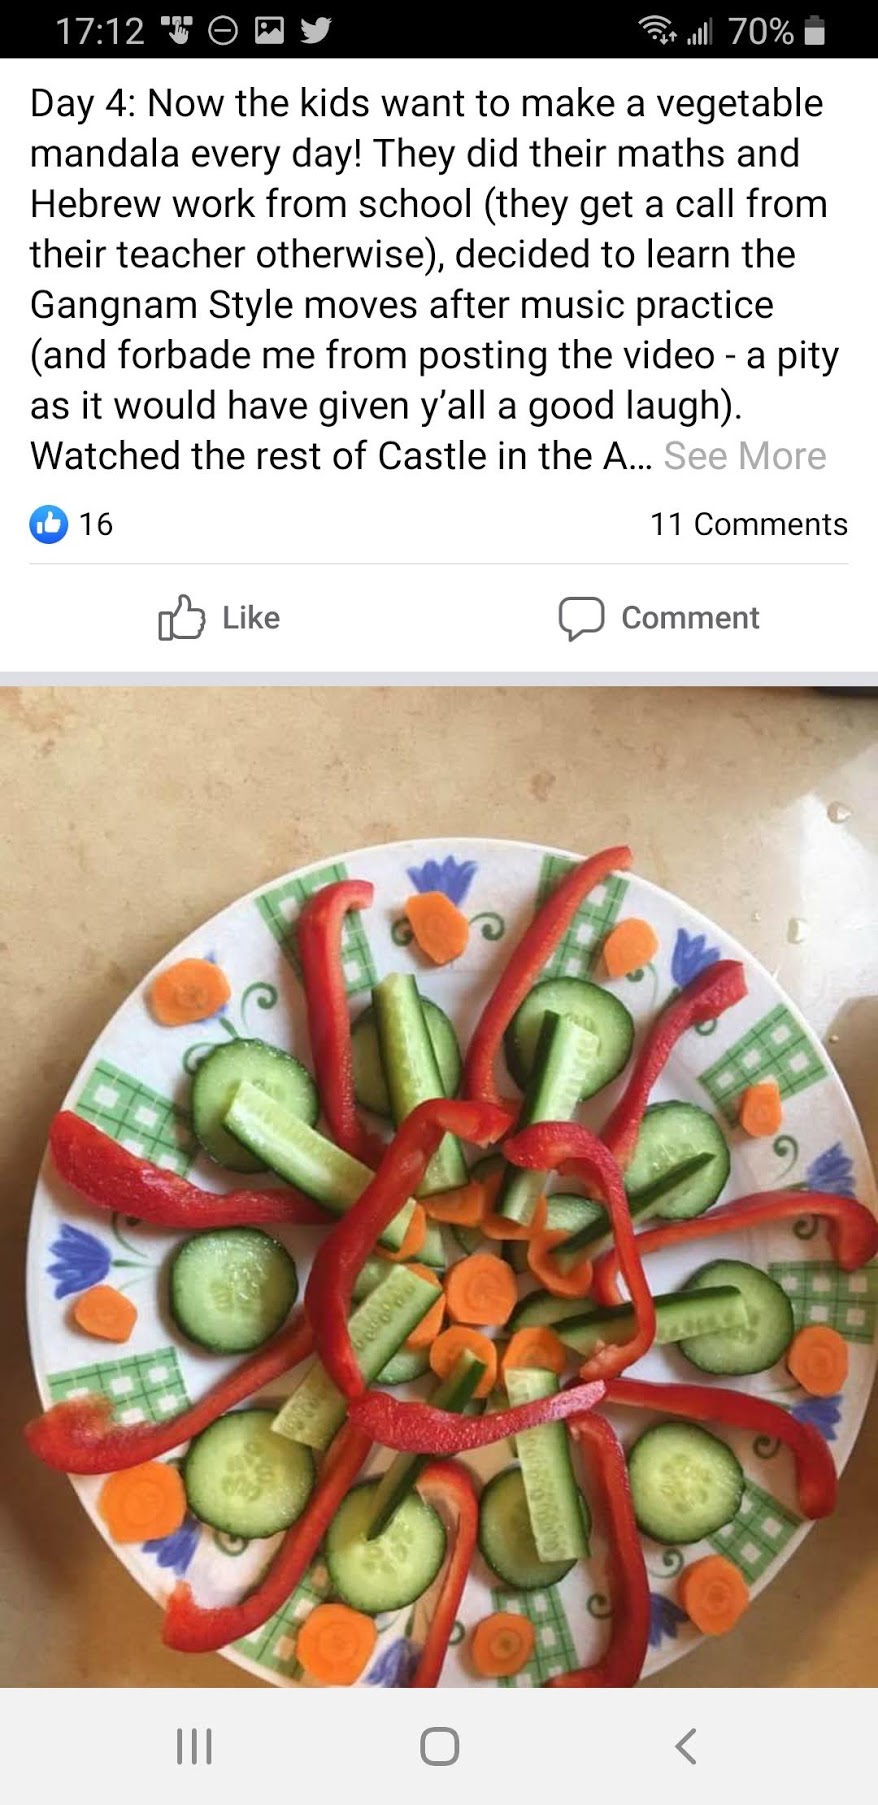 Facebook post detailing keeping two kids busy at home, image shows plate with cucumbers, carrots and peppers arranged in a mandela